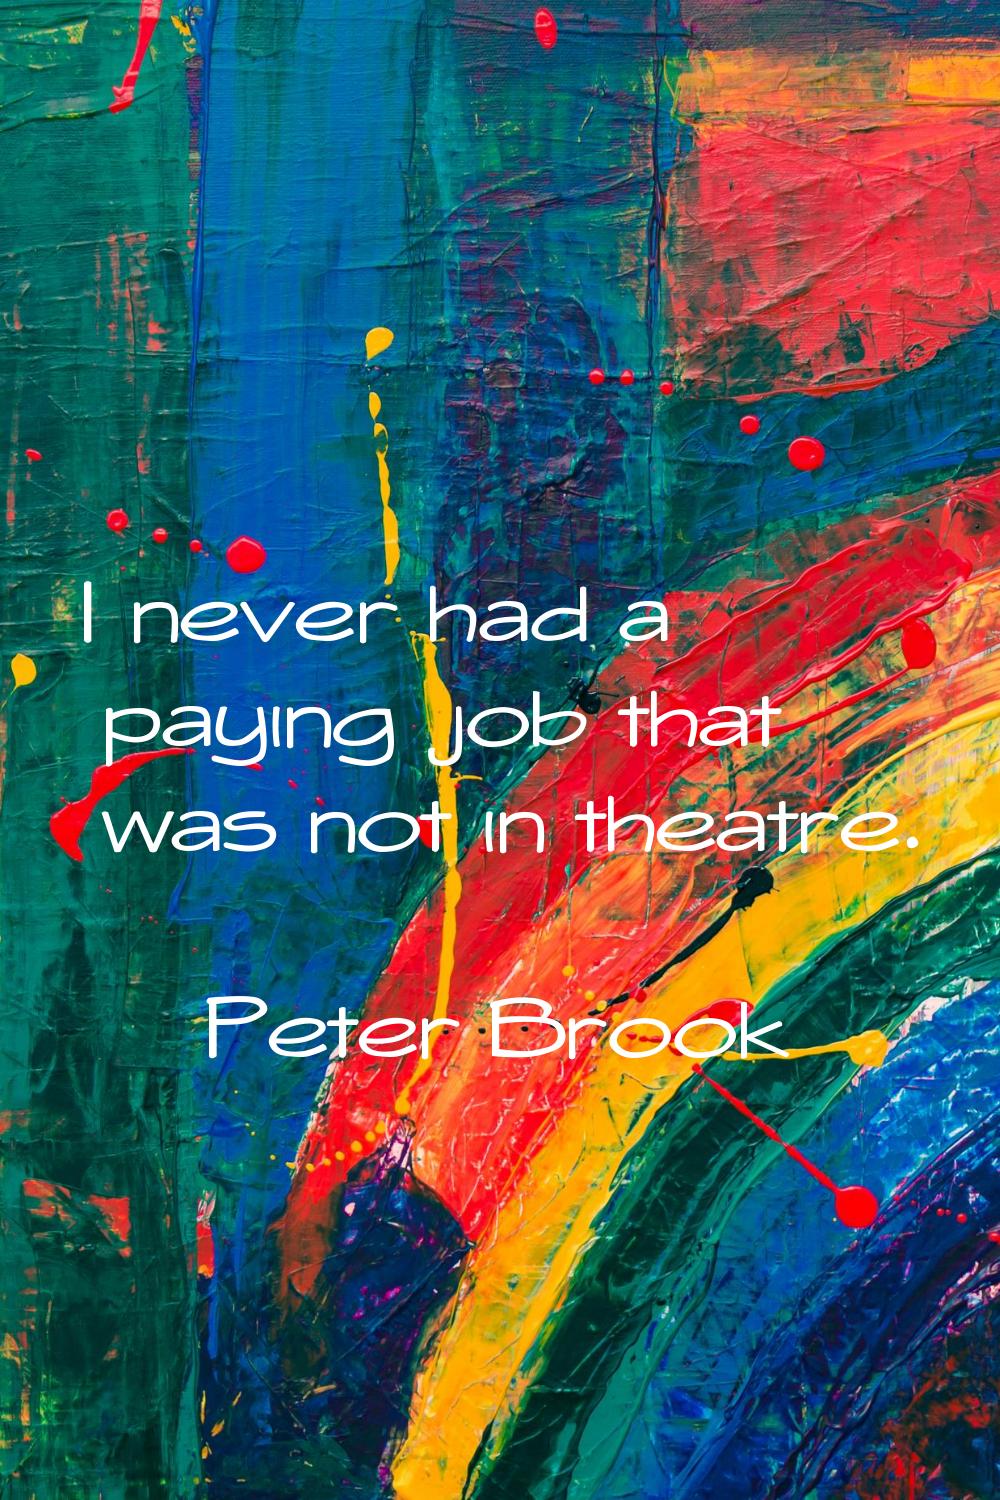 I never had a paying job that was not in theatre.